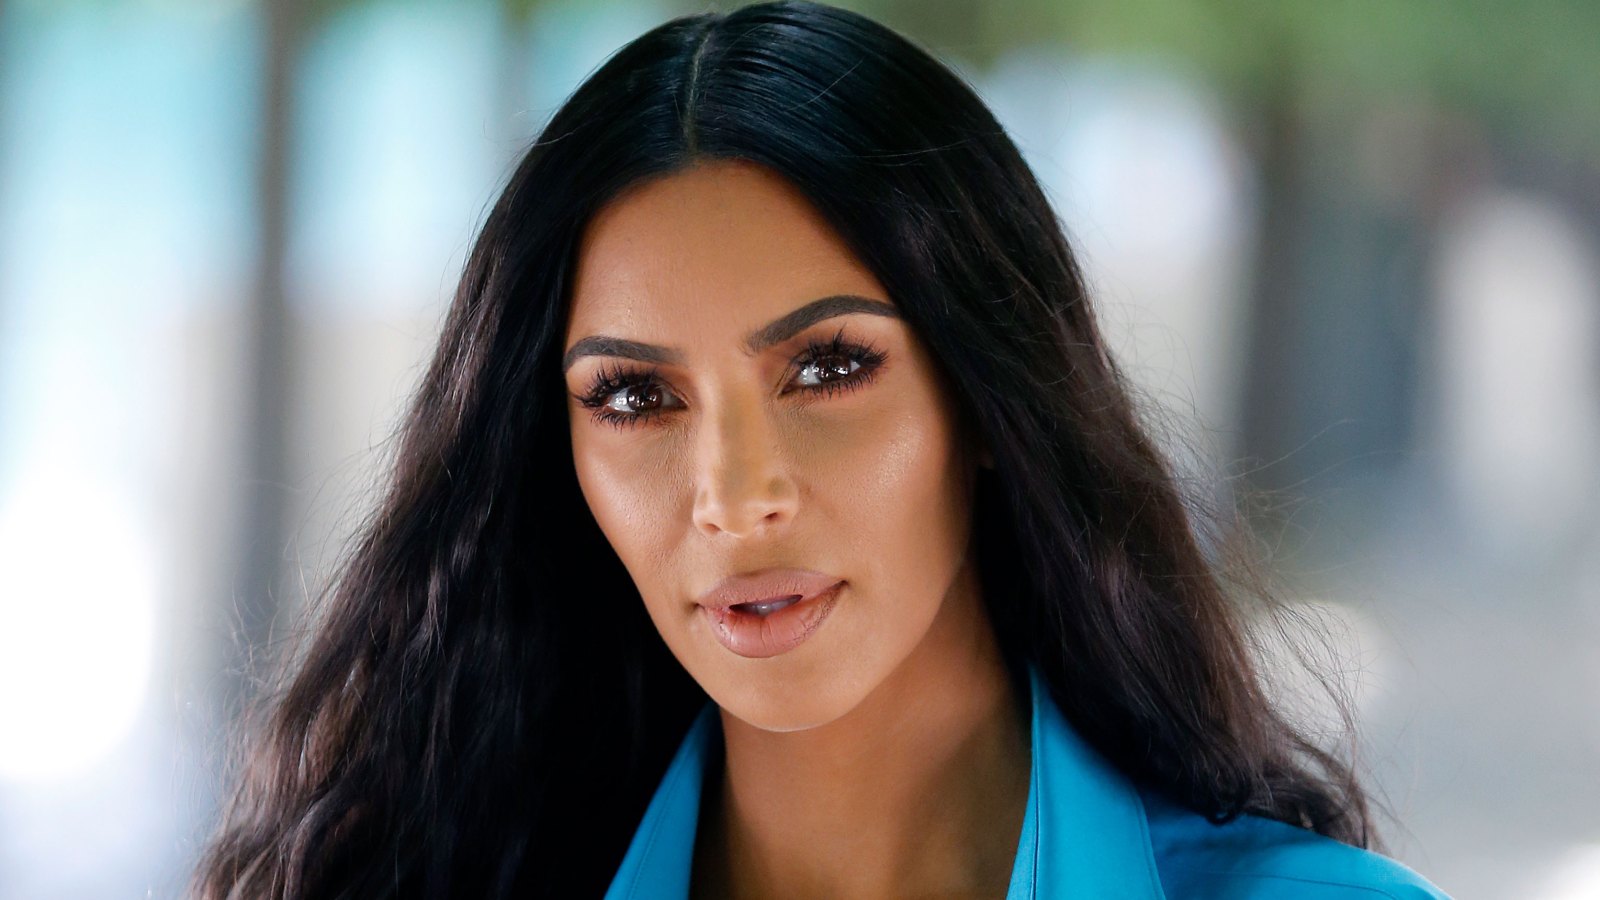 Kim Kardashian Being Flooded With Requests for Assistance With Seeking Clemency